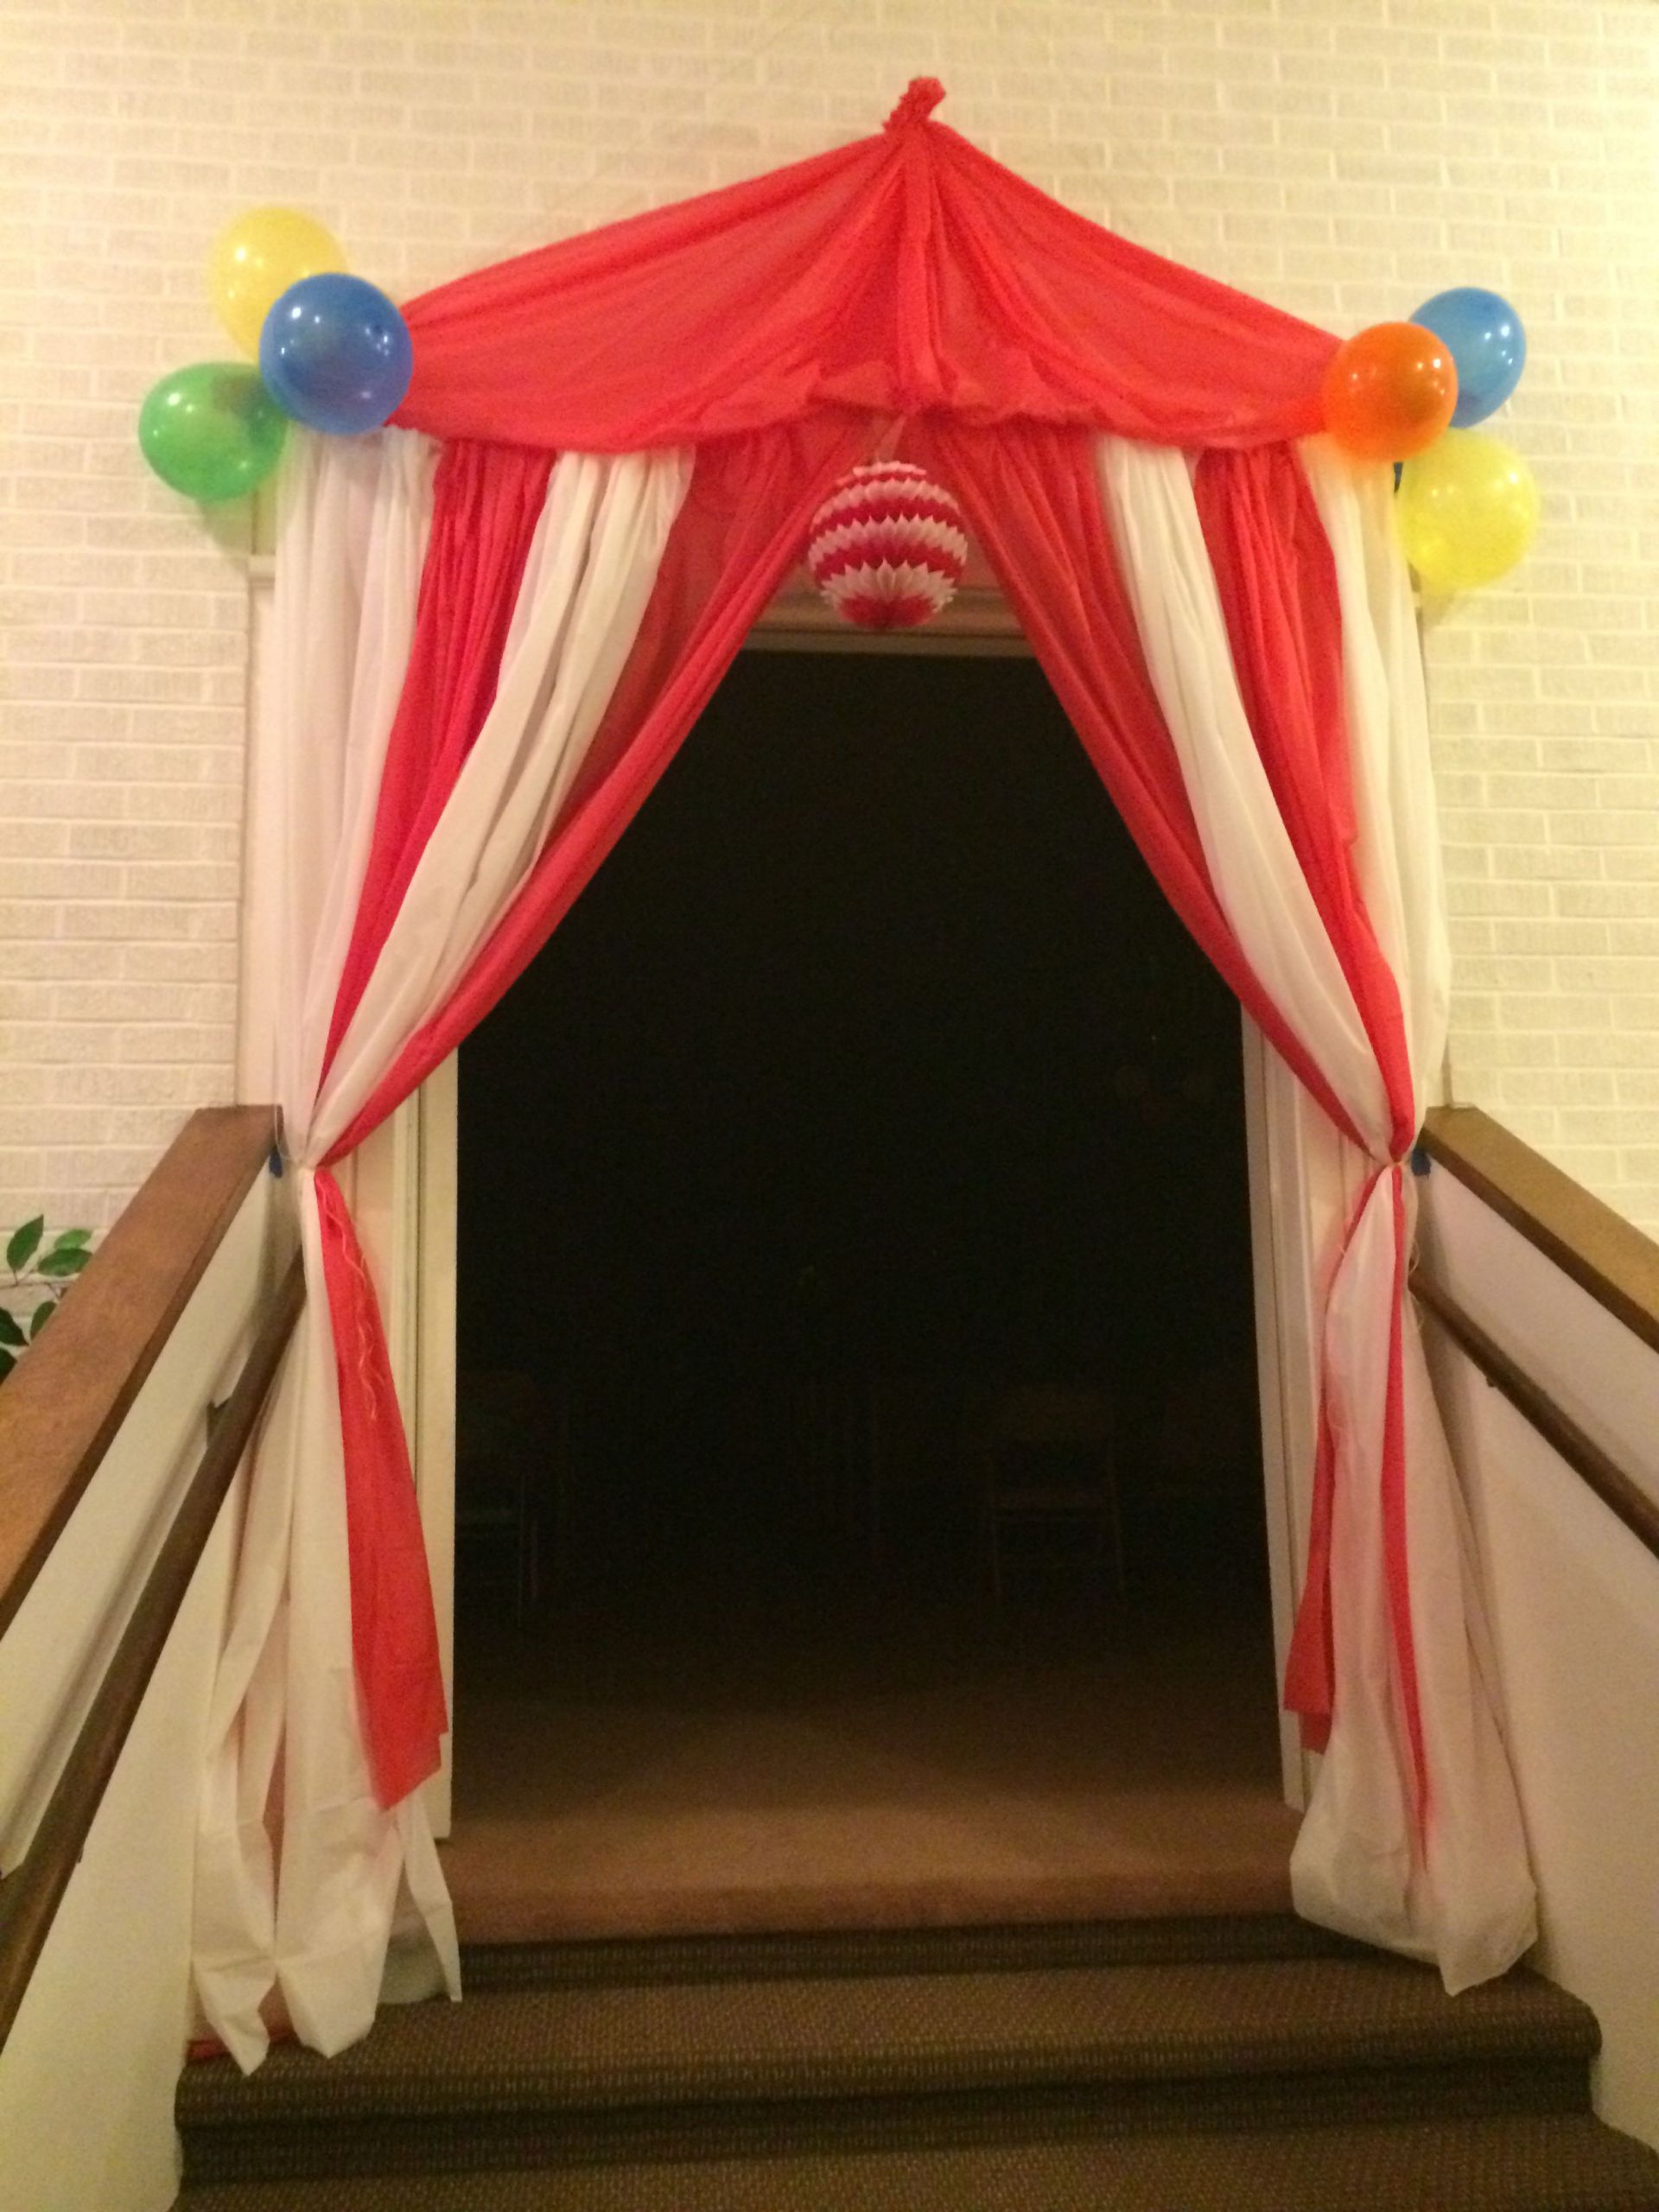 Carnival Themed Graduation Party Ideas
 Tent Entrance we made for our circus themed preschool